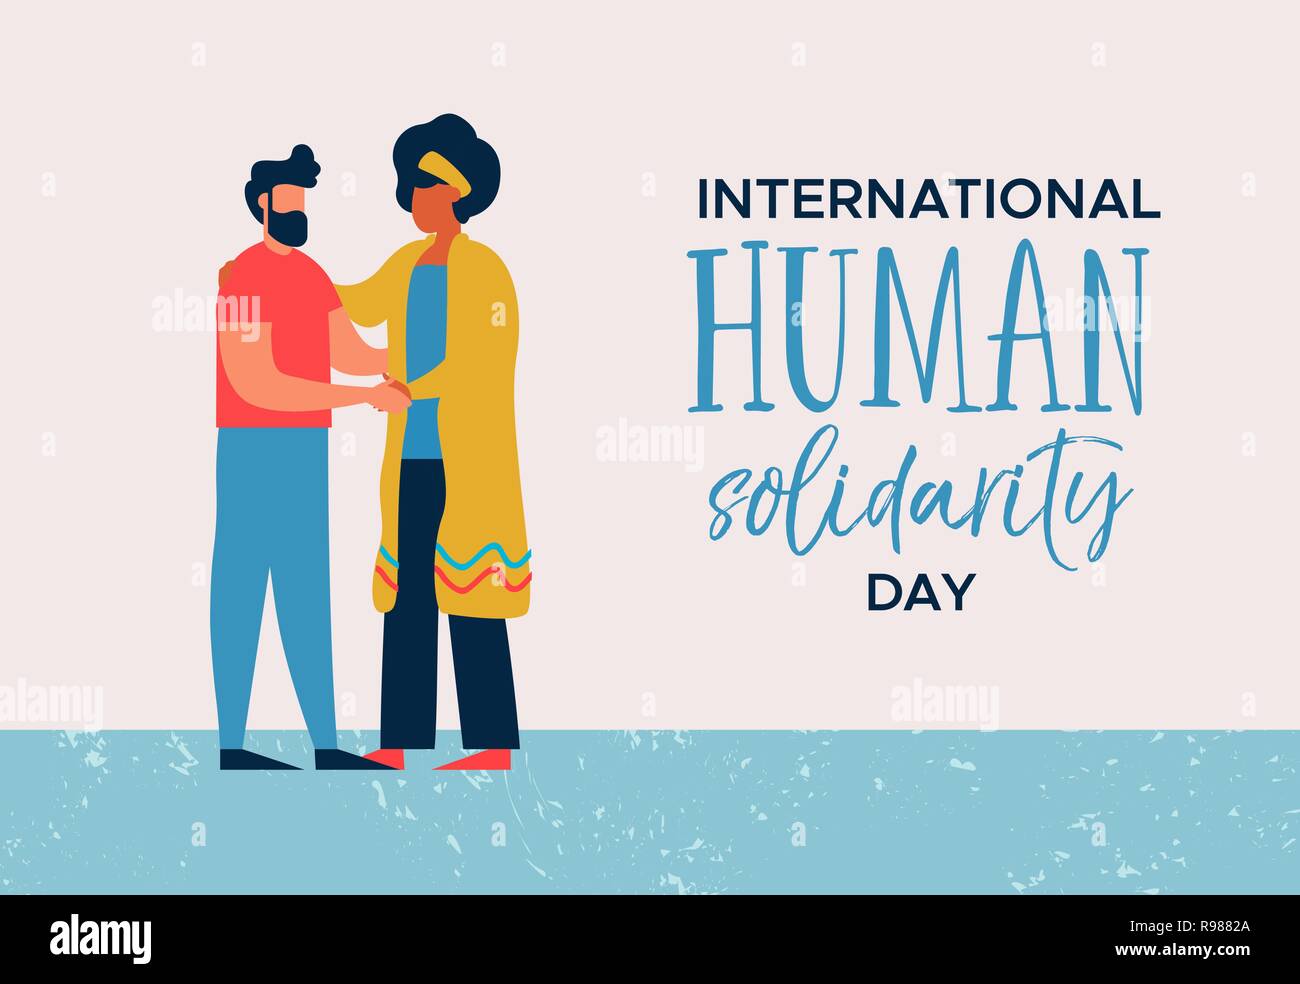 International Human Solidarity Day illustration of woman and man from different cultures helping each other for community help, social support concept Stock Vector